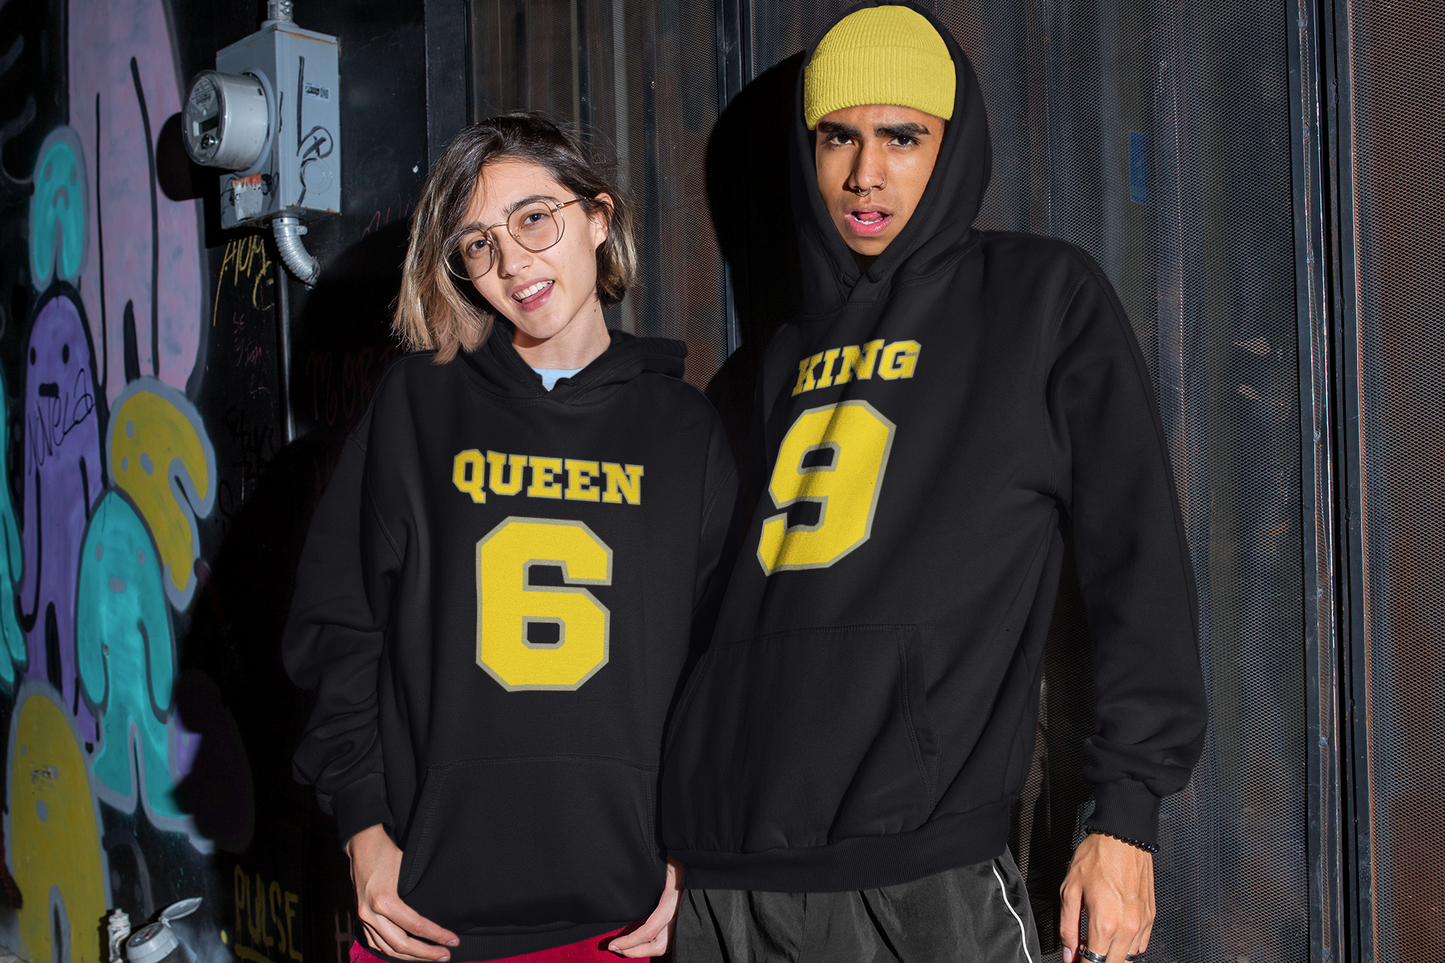 Black Matching King and Queen Hoodies - Match Made in Love: 69 Sports-style